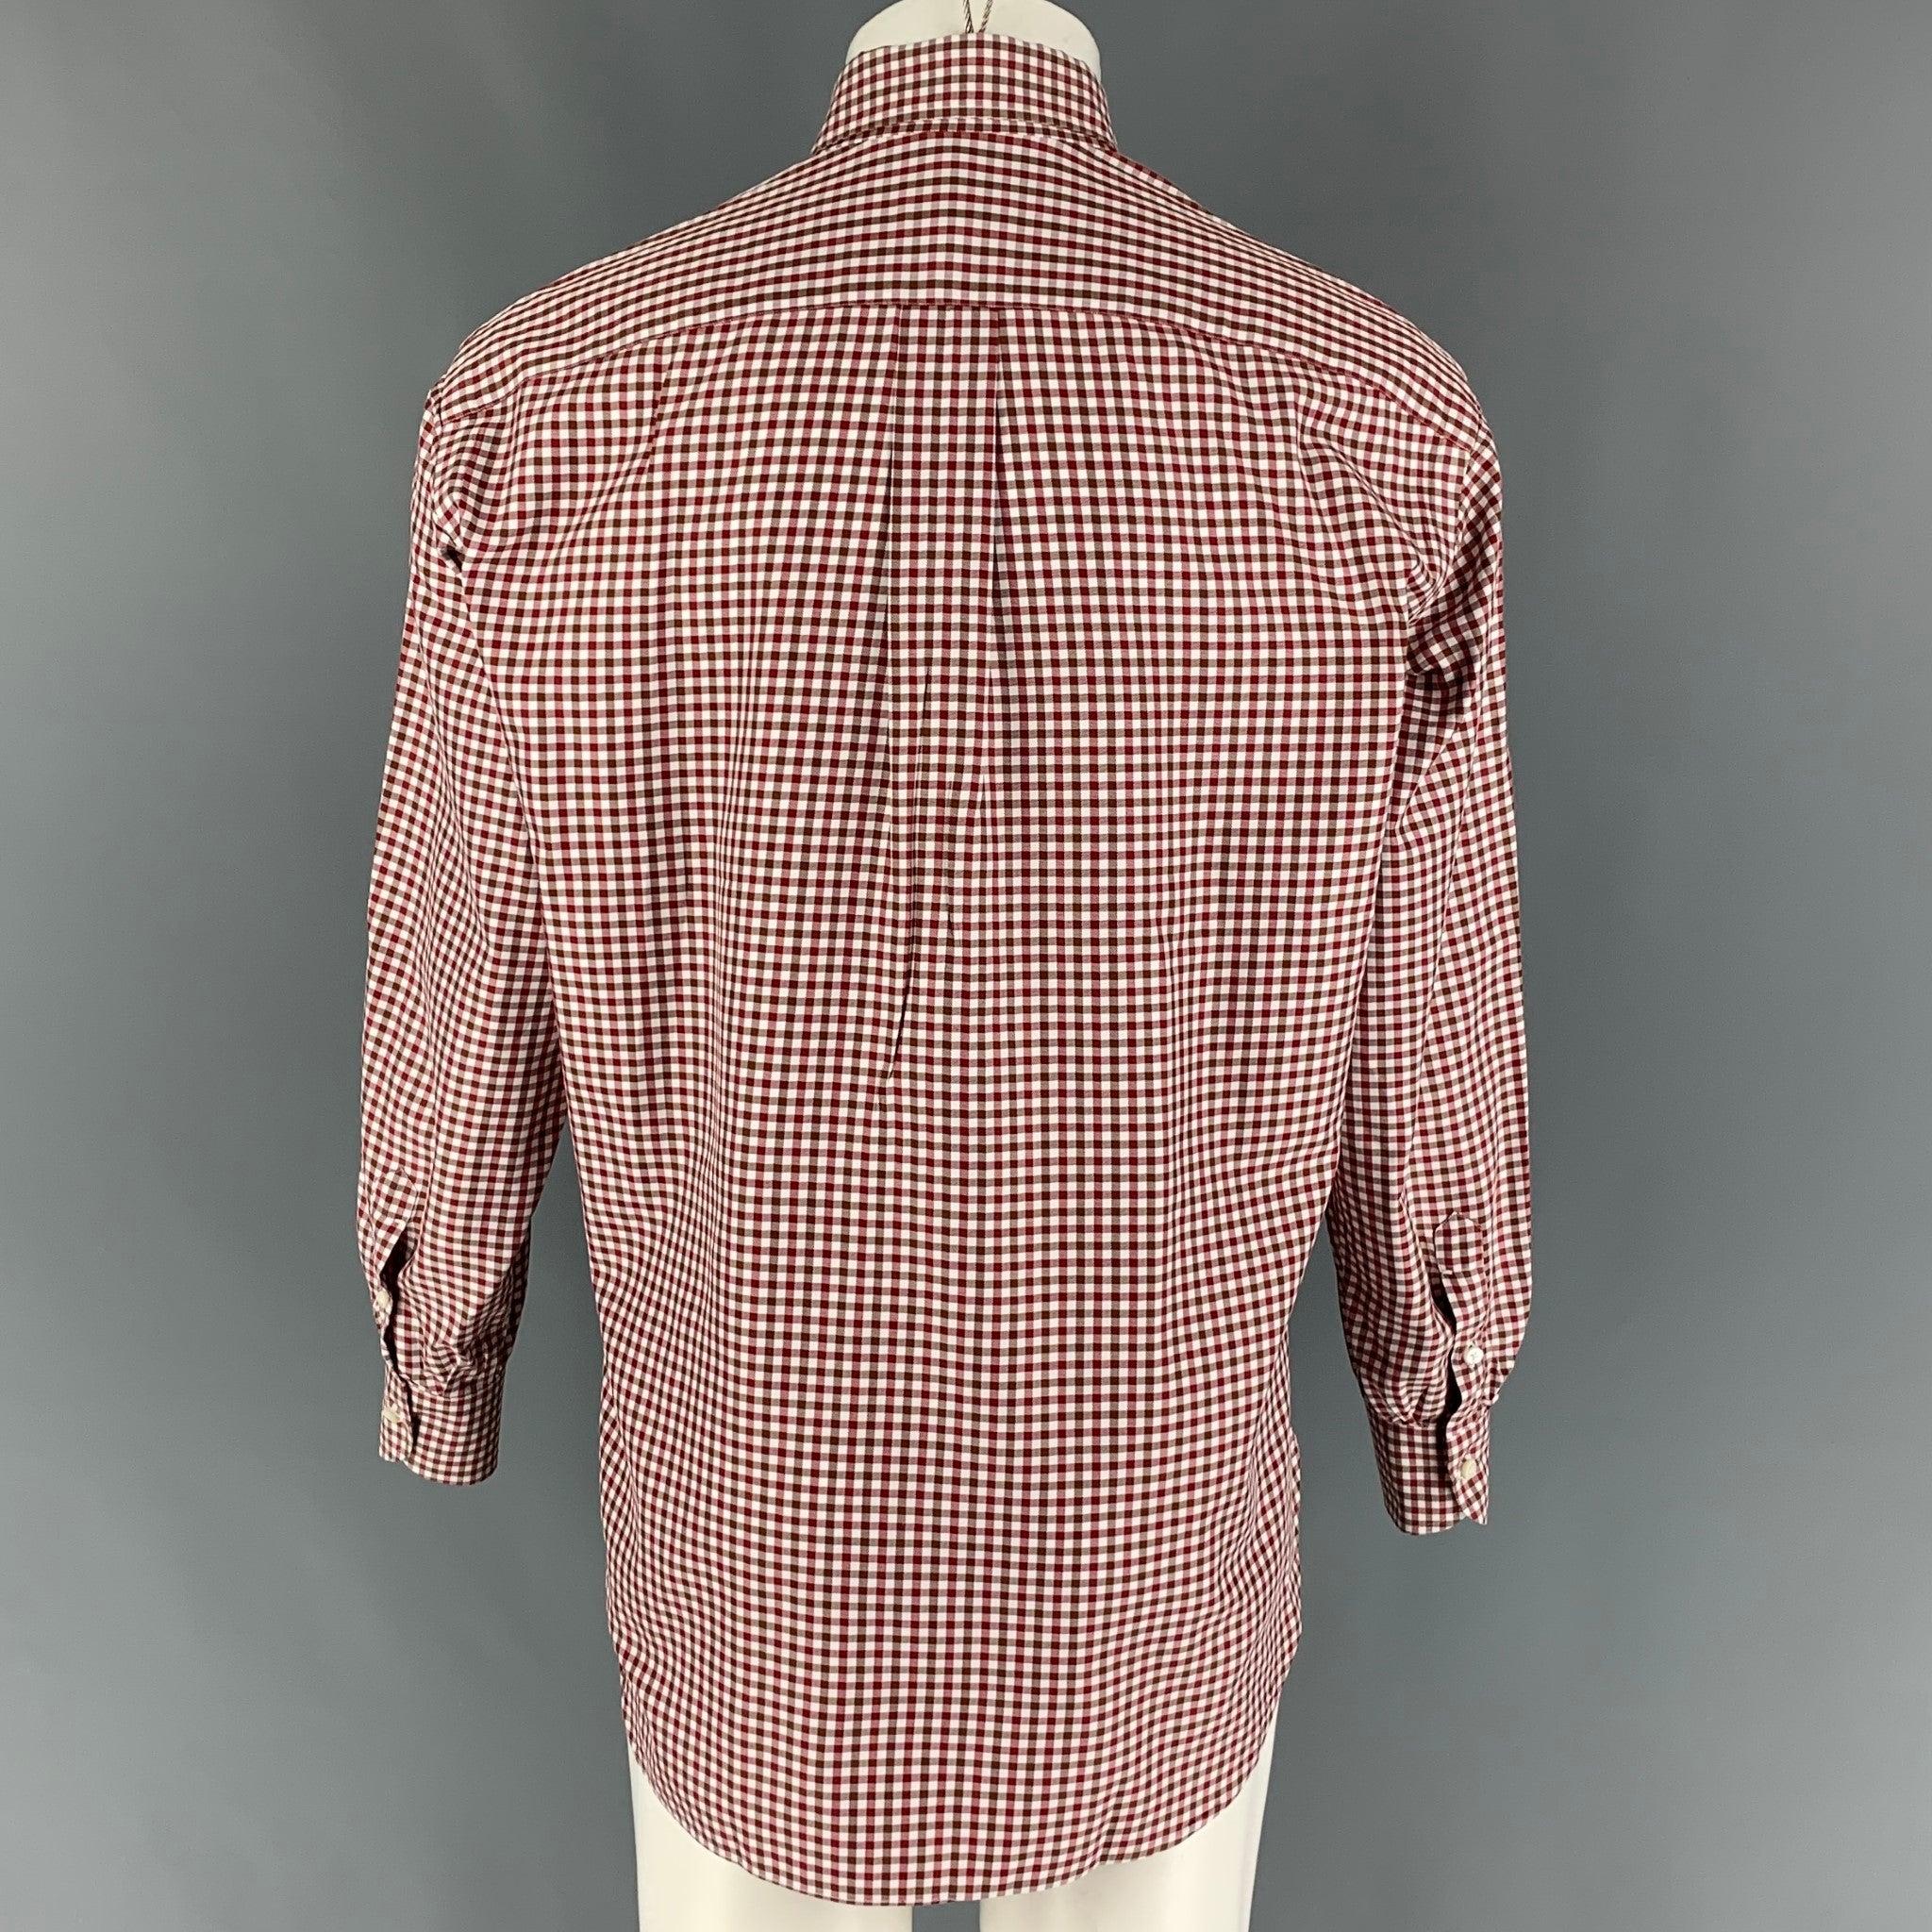 BORRELLI for WILKES BASHFORD Size M White Checkered Cotton Long Sleeve Shirt In Excellent Condition For Sale In San Francisco, CA